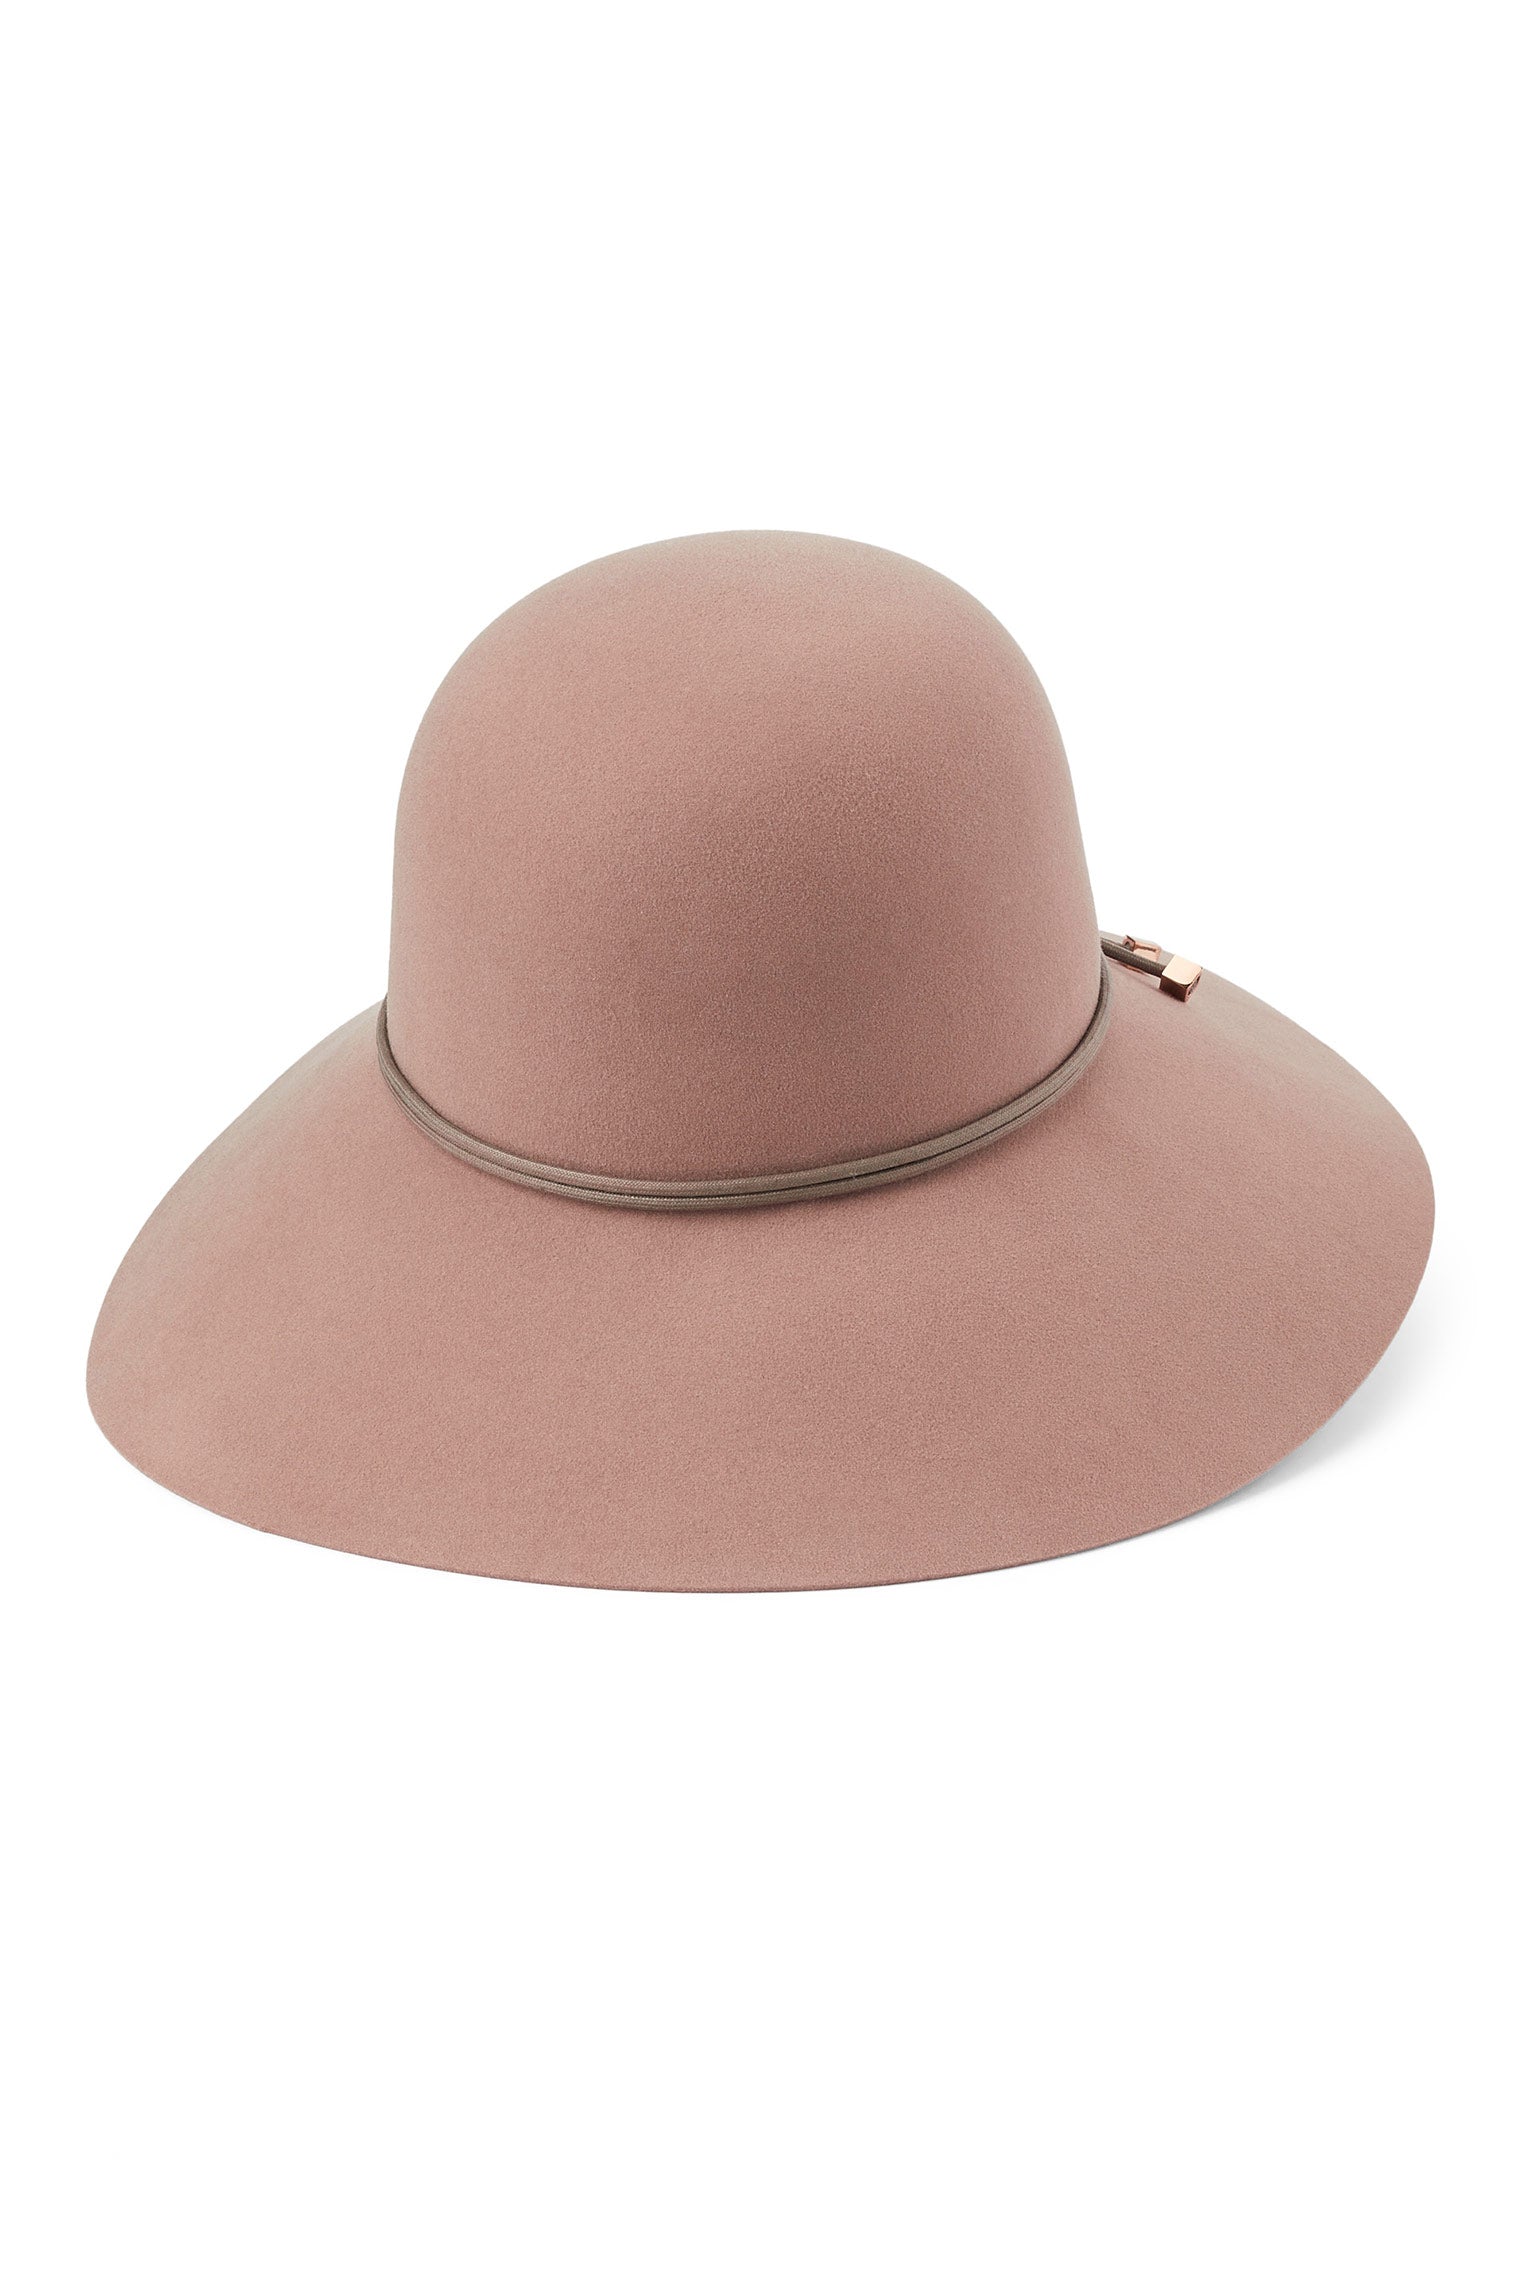 Peggy Escorial Wool Cloche - New Season Hat Collection - Lock & Co. Hatters London UK